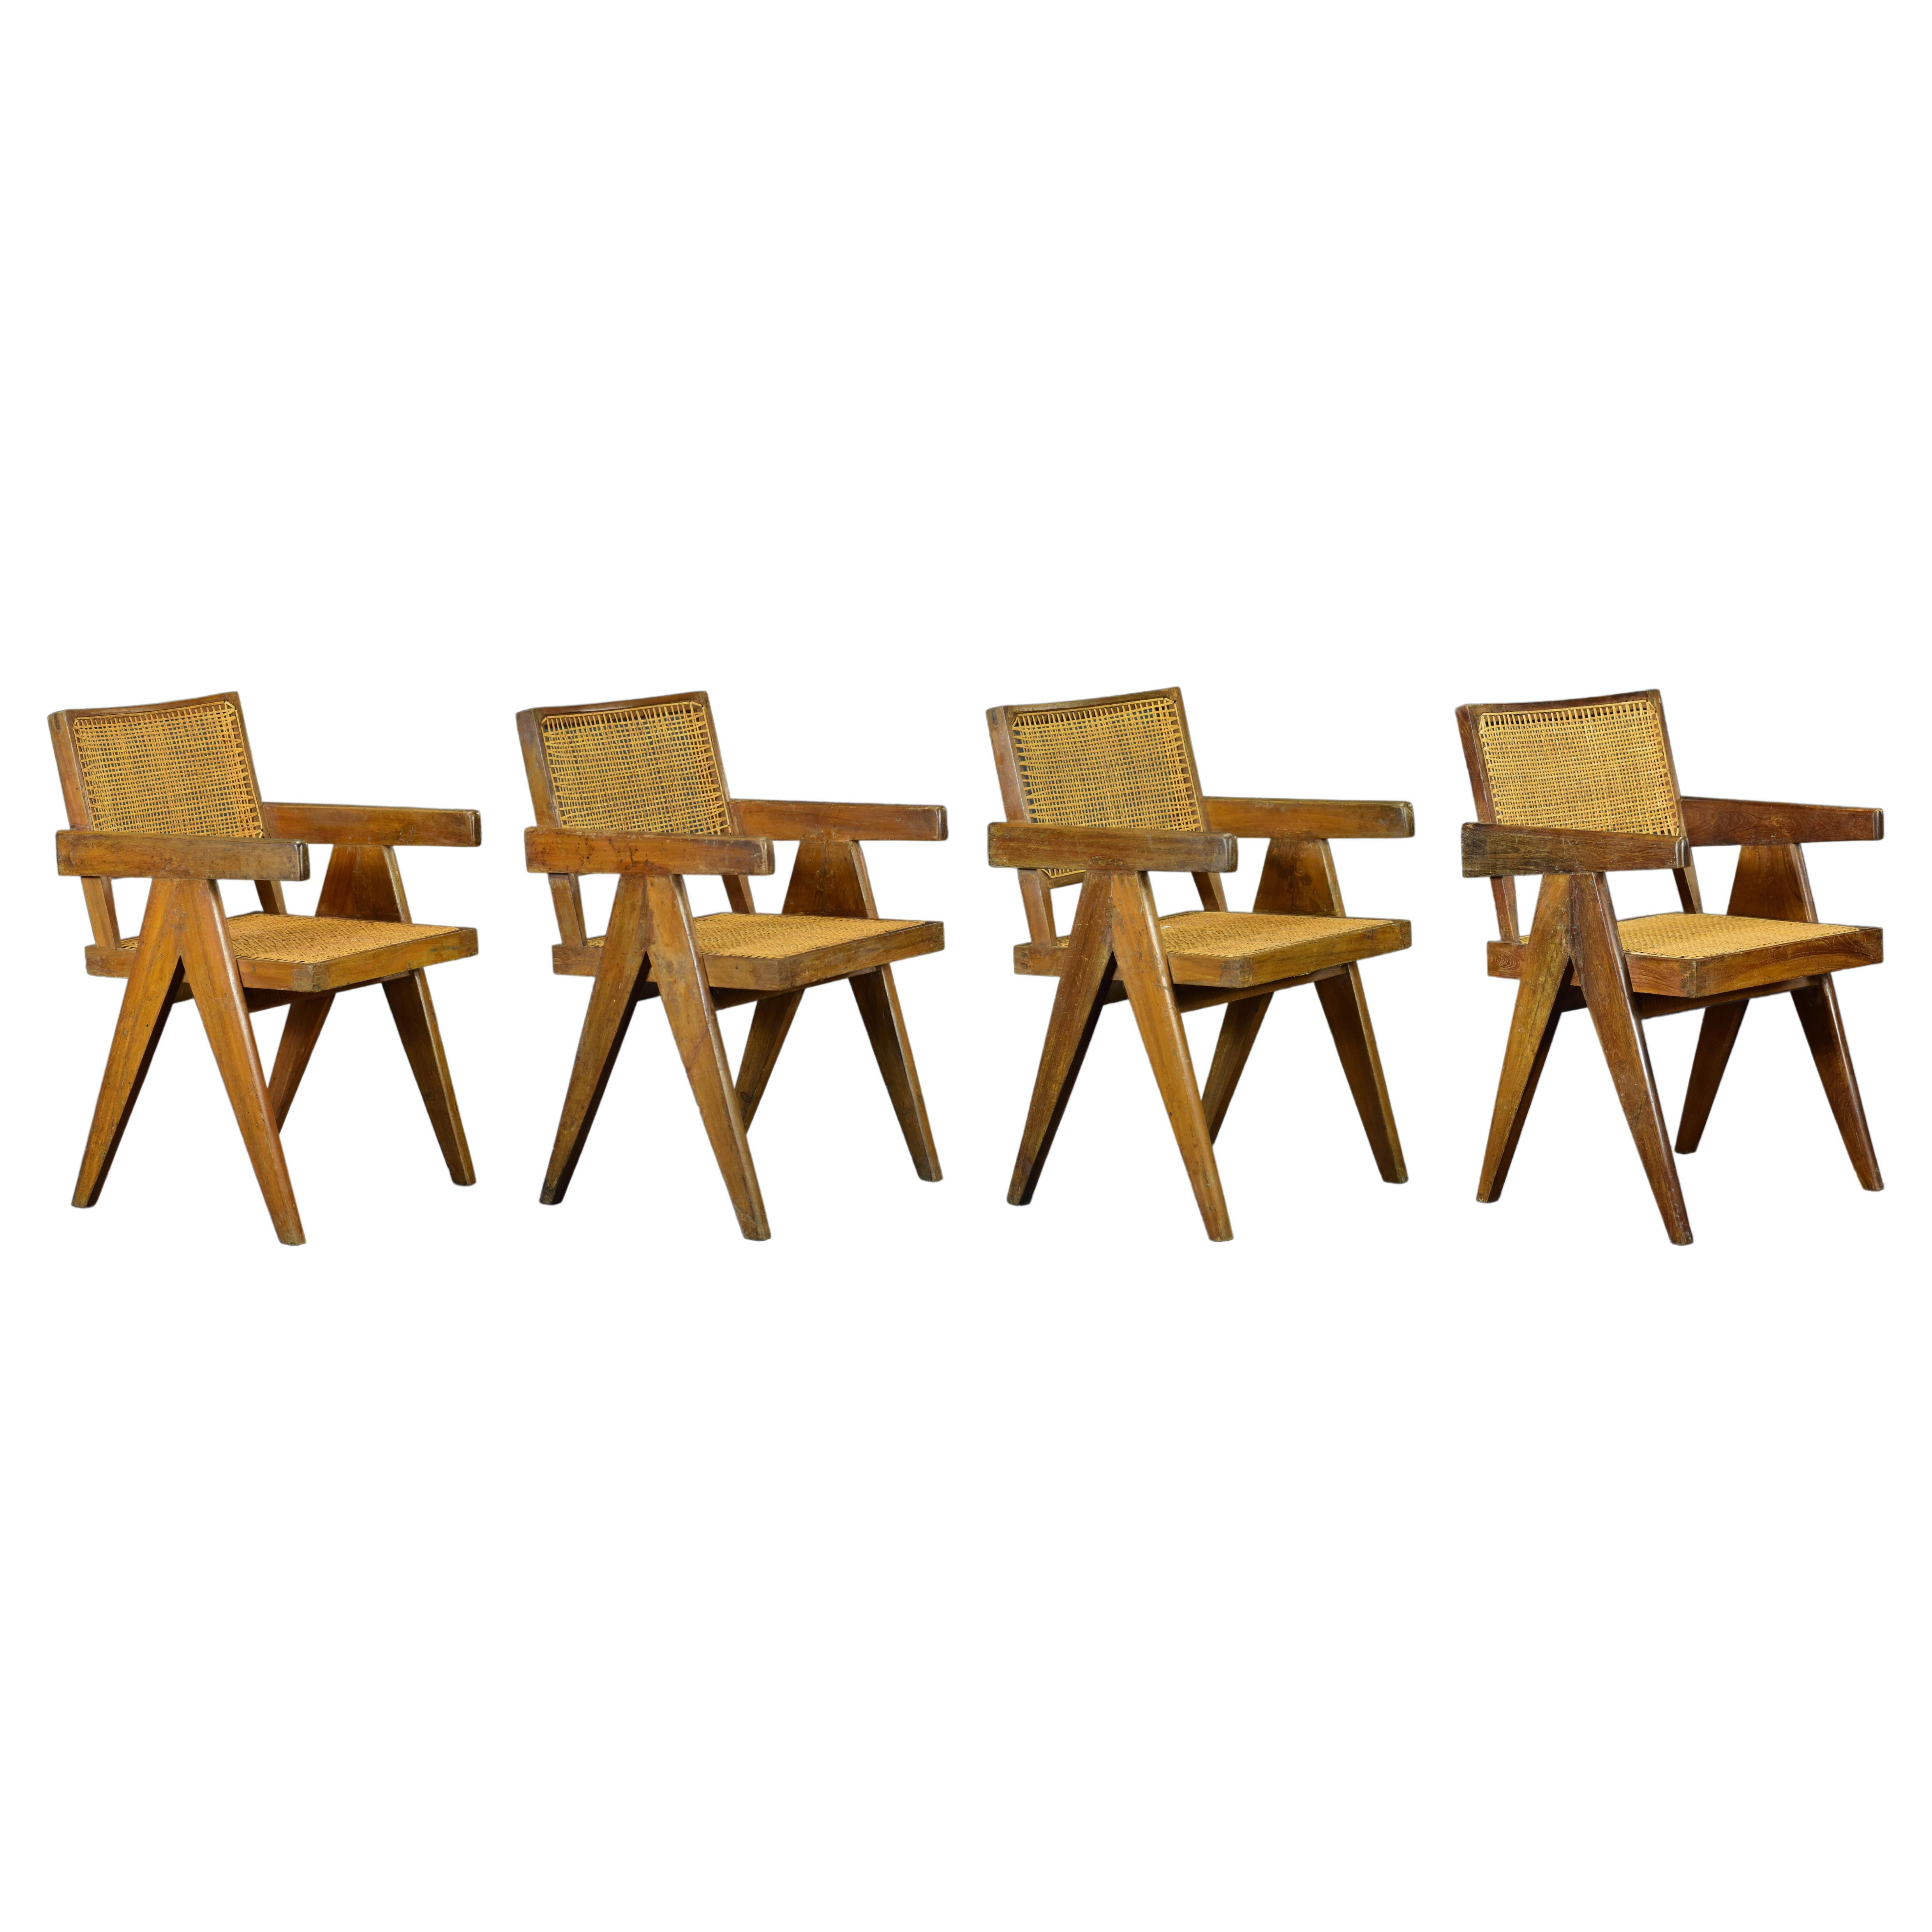 Pierre Jeanneret Set of 4 Chairs PJ-SI-28-B / Authentic Mid-Century Modern